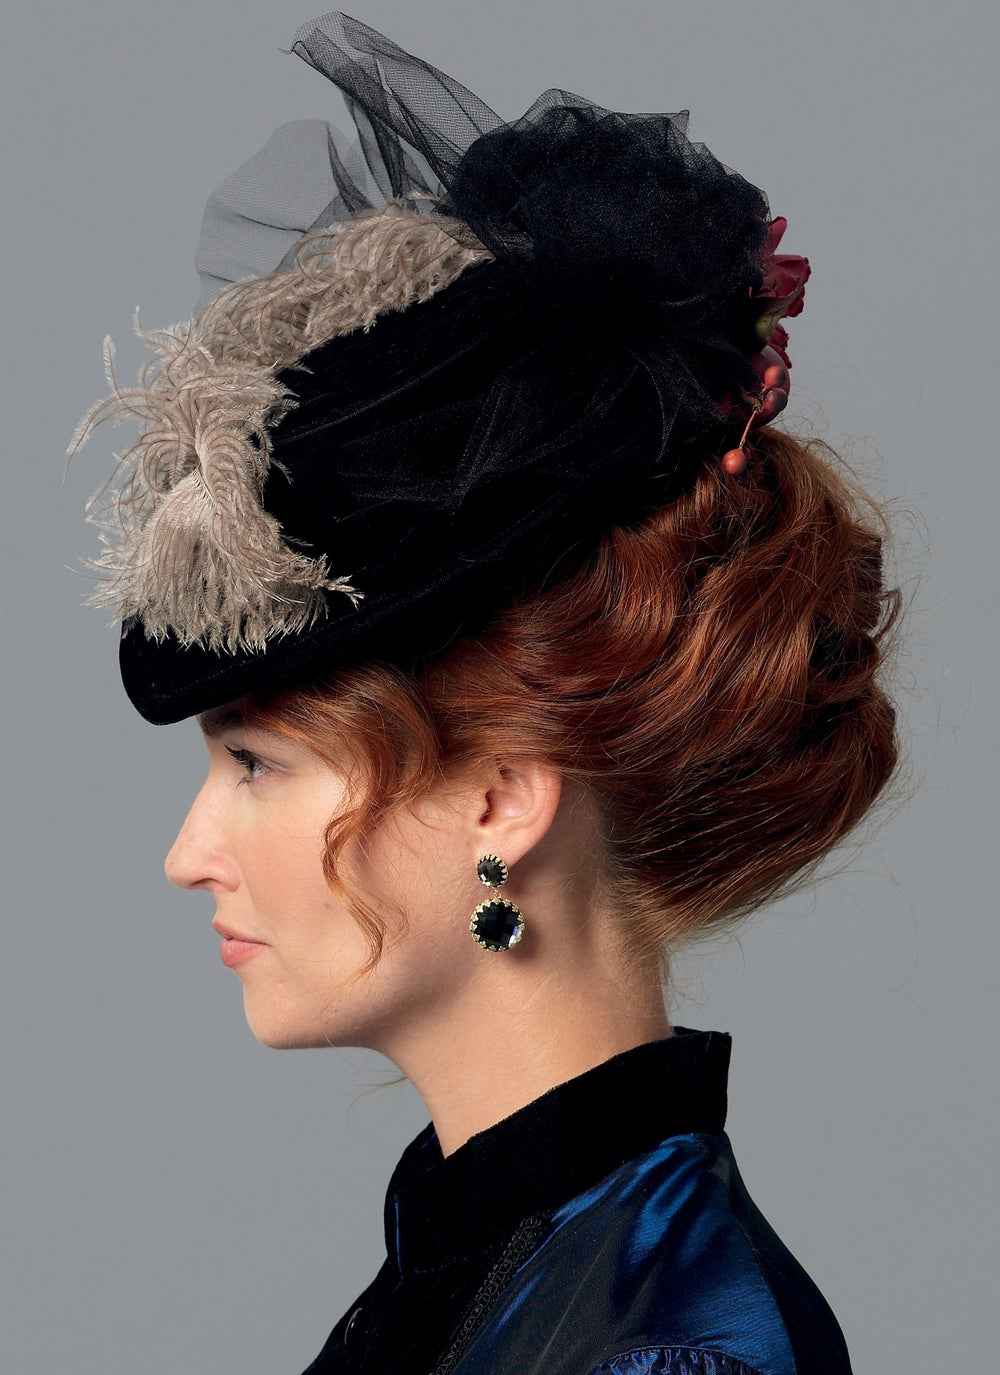 B6397 Misses' Hats in Four Styles from Jaycotts Sewing Supplies